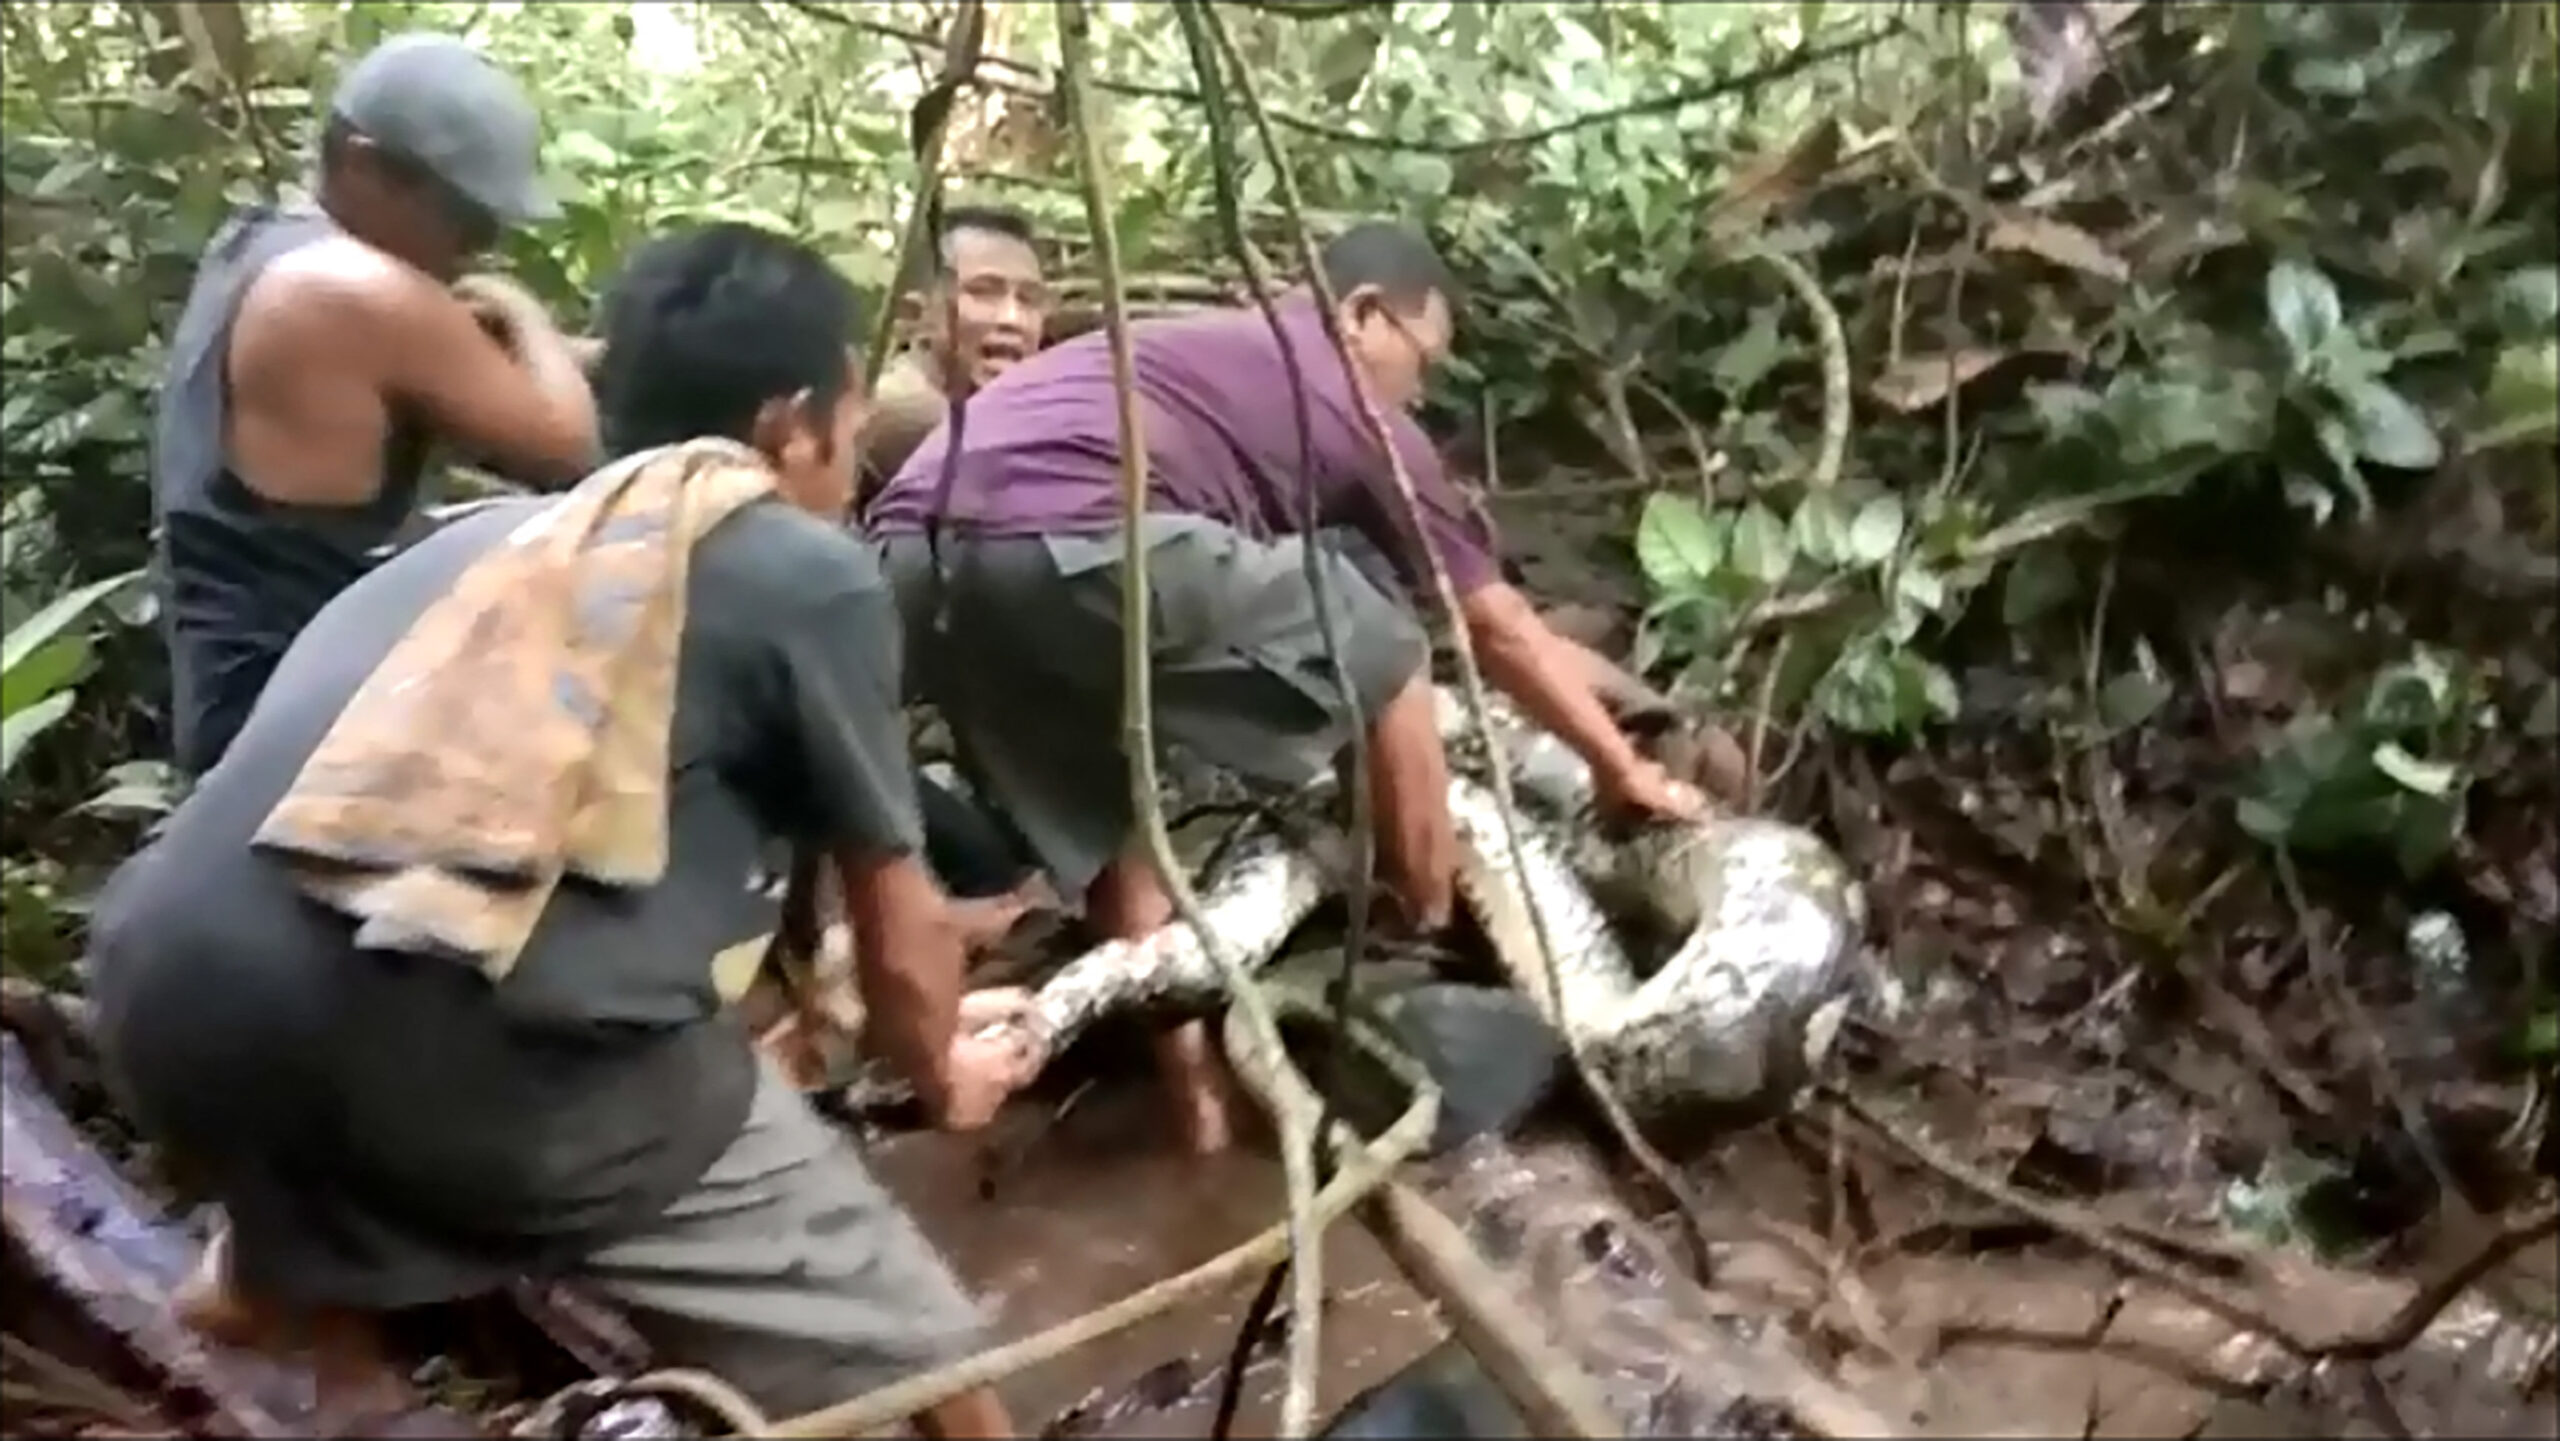 Python swallows woman whole in Indonesia